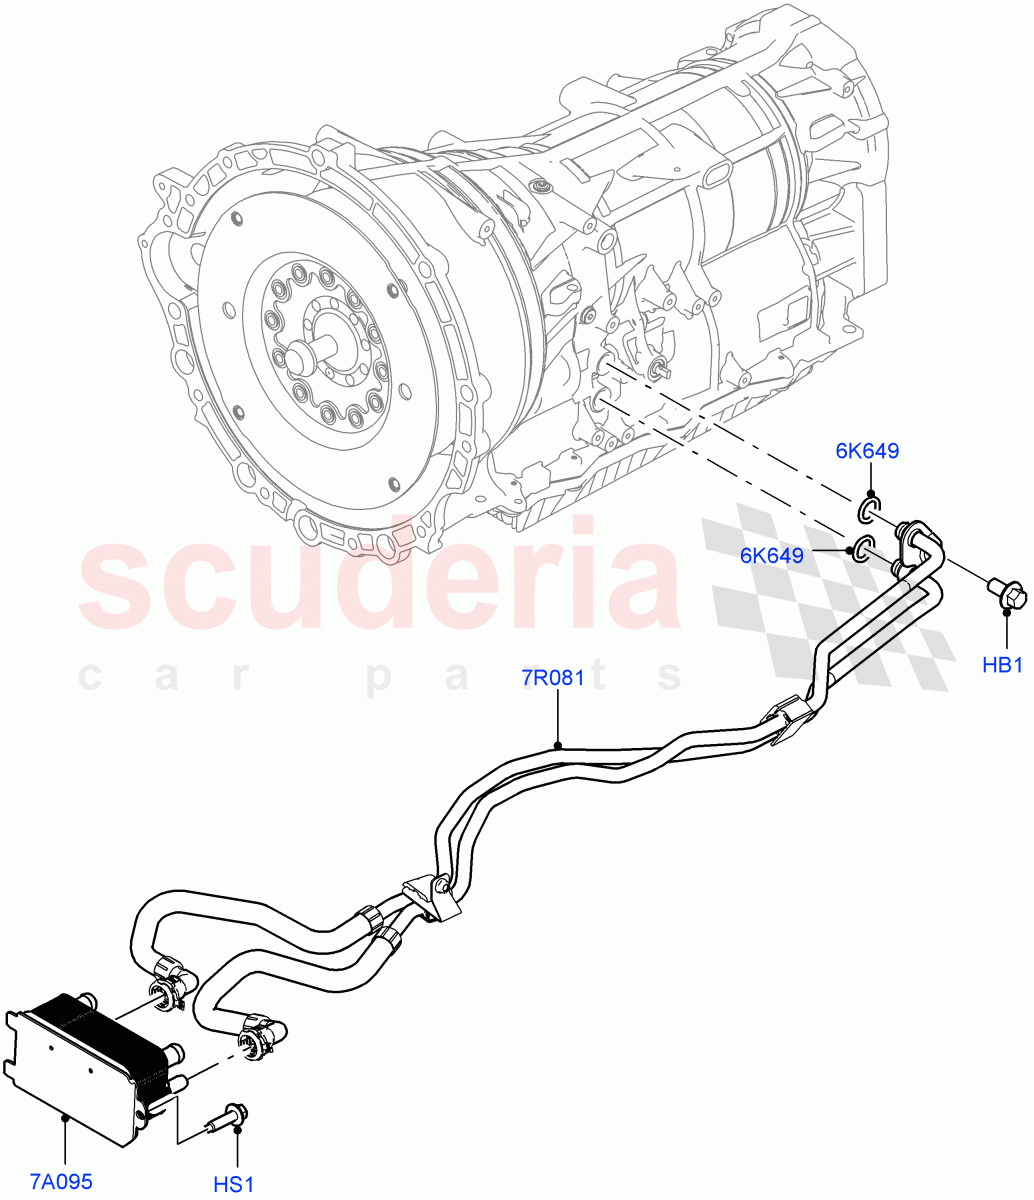 Transmission Cooling Systems(Solihull Plant Build)(2.0L I4 High DOHC AJ200 Petrol,8 Speed Auto Trans ZF 8HP45)((V)FROMJA000001) of Land Rover Land Rover Discovery 5 (2017+) [3.0 I6 Turbo Petrol AJ20P6]